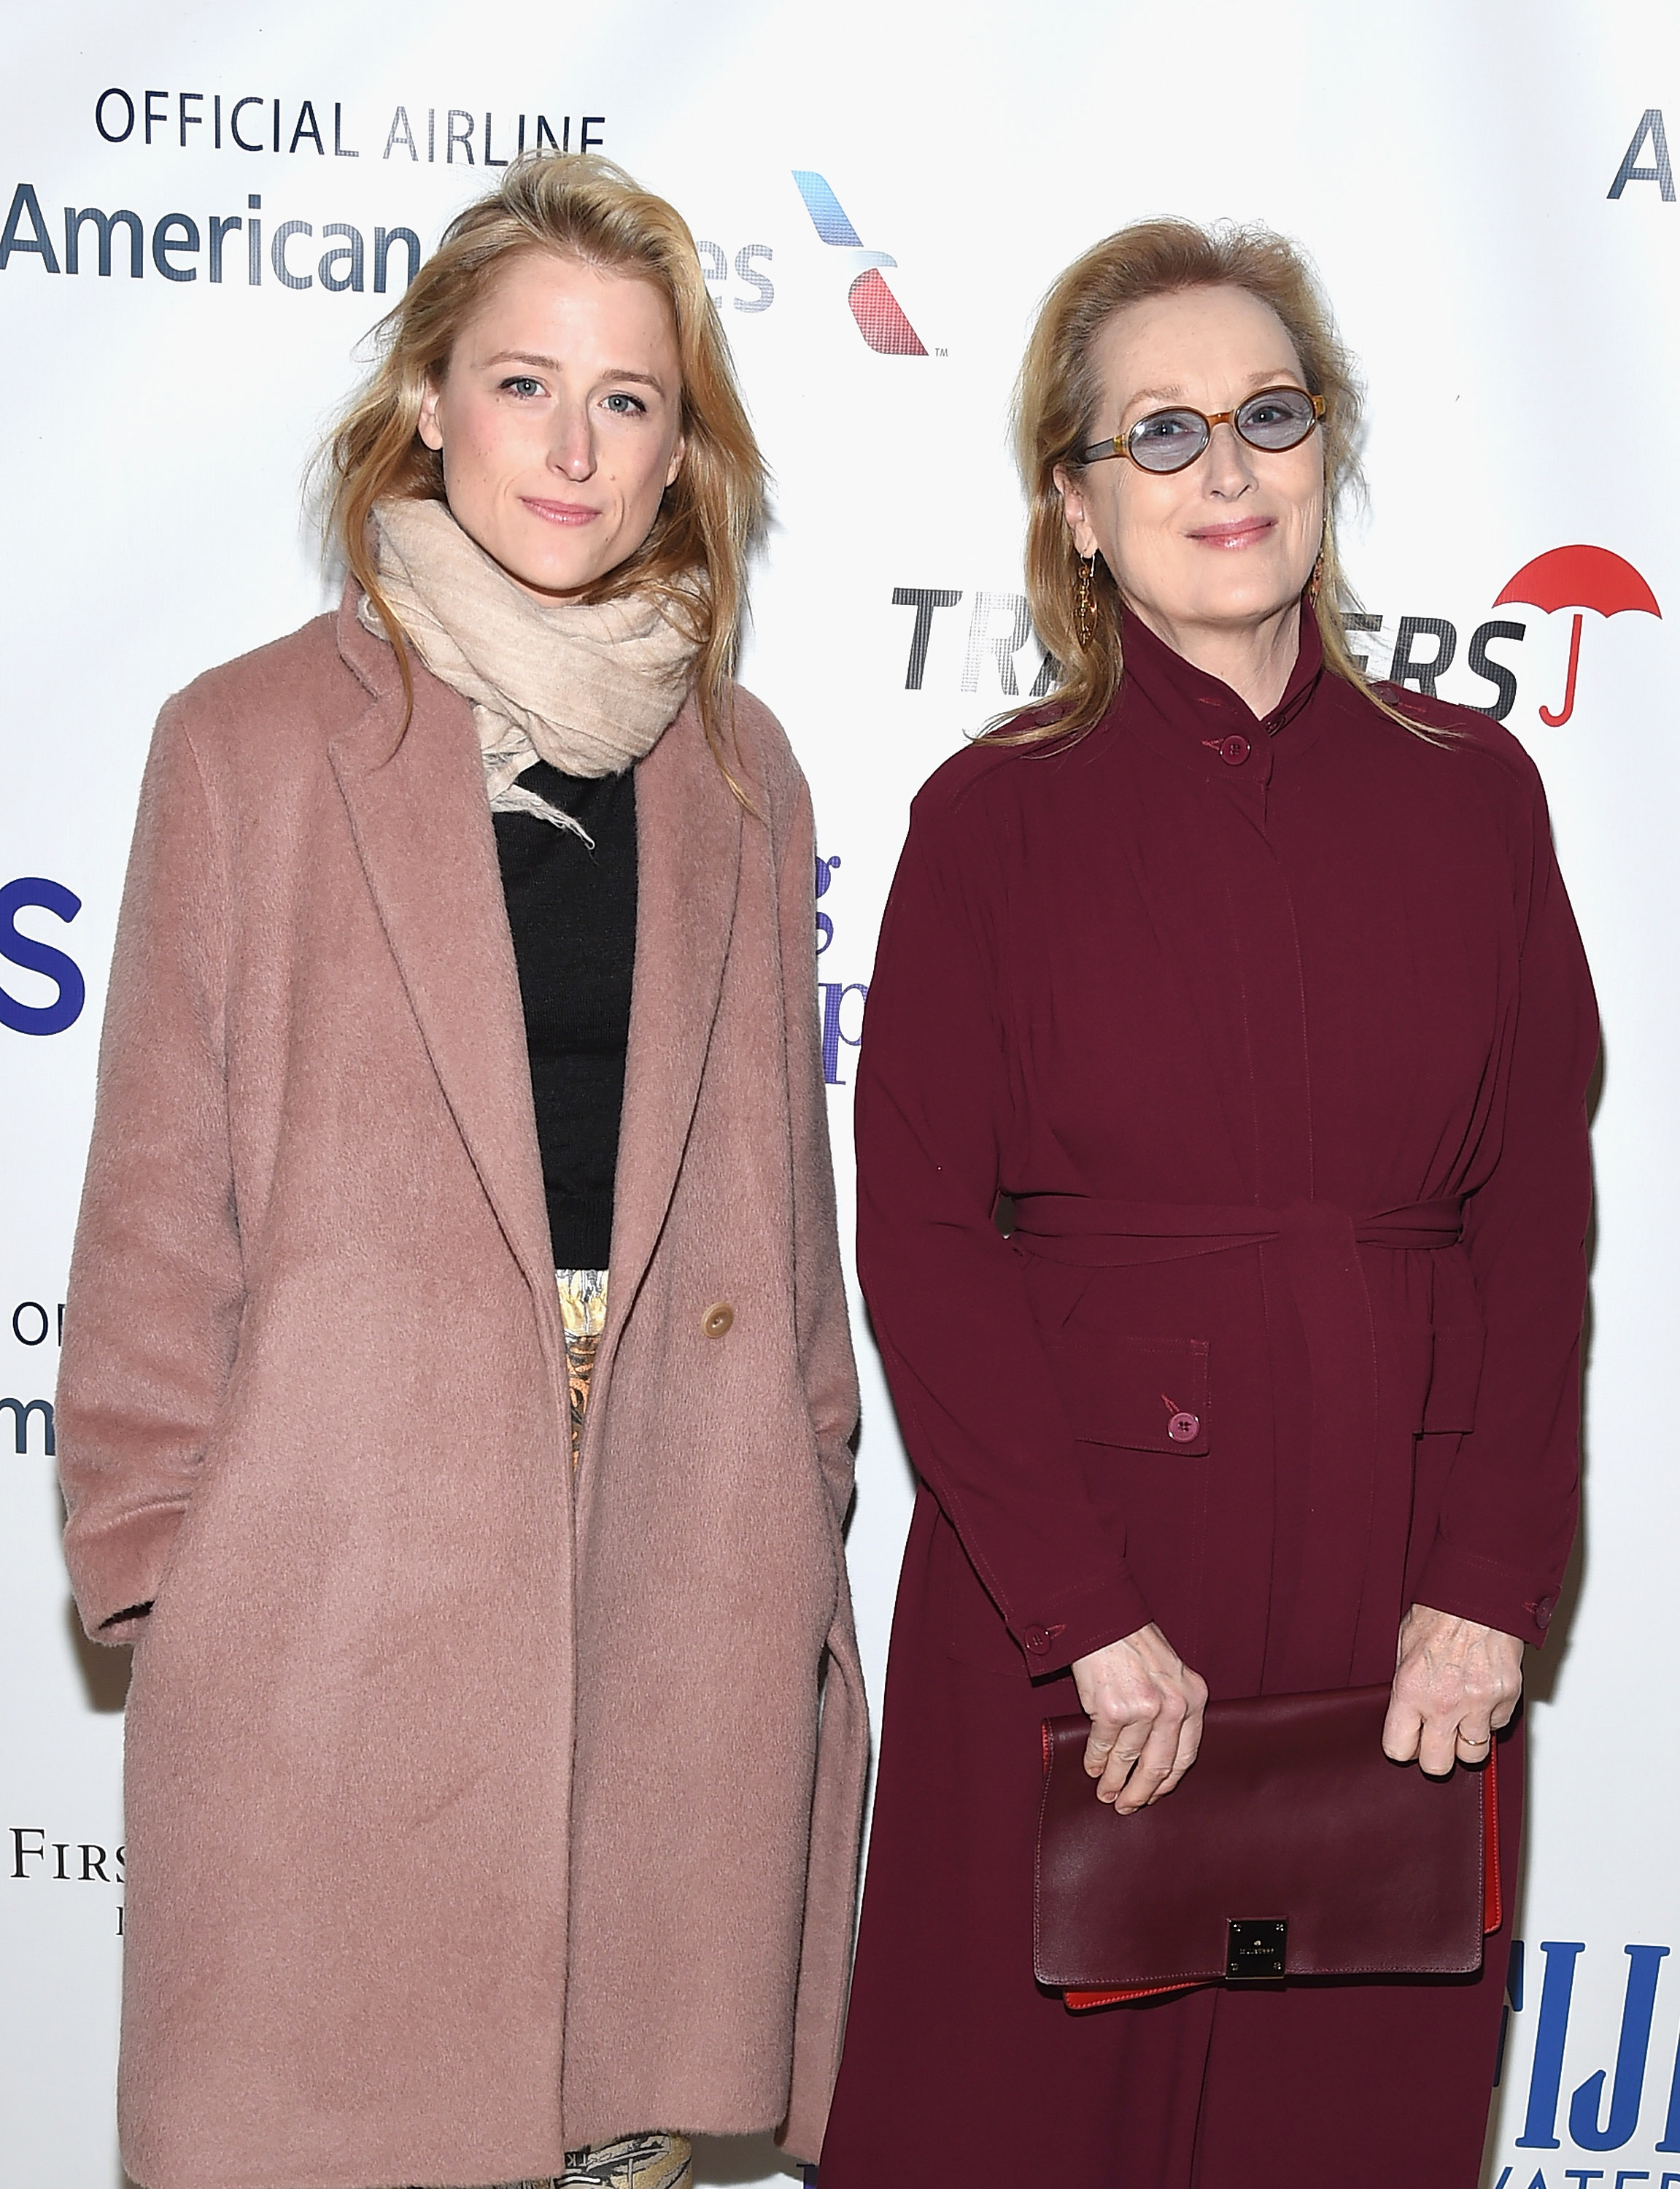 Mamie Gummer and Meryl Streep attend the 29th Annual Citymeals-On-Wheels Power Lunch For Women at The Plaza Hotel on November 20, 2015 in New York City.| Source: Getty Images